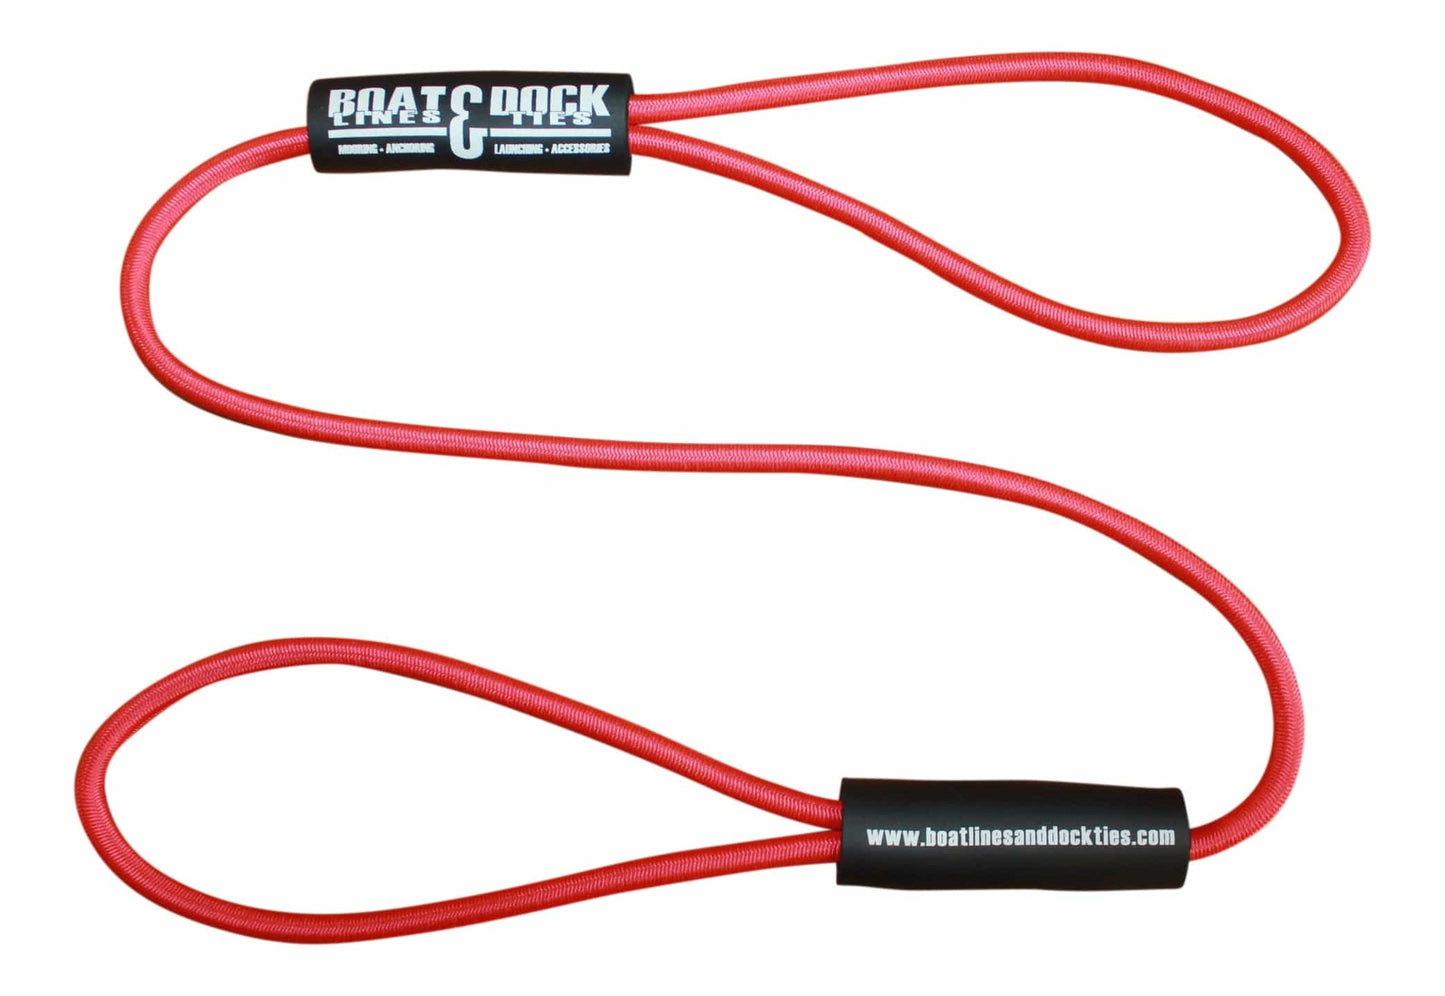 Basic Bungee Boat Dock Ties with Floats - 2 pair pack - Boat Lines & Dock Ties Boat Lines & Dock Ties 36 Inch / Red